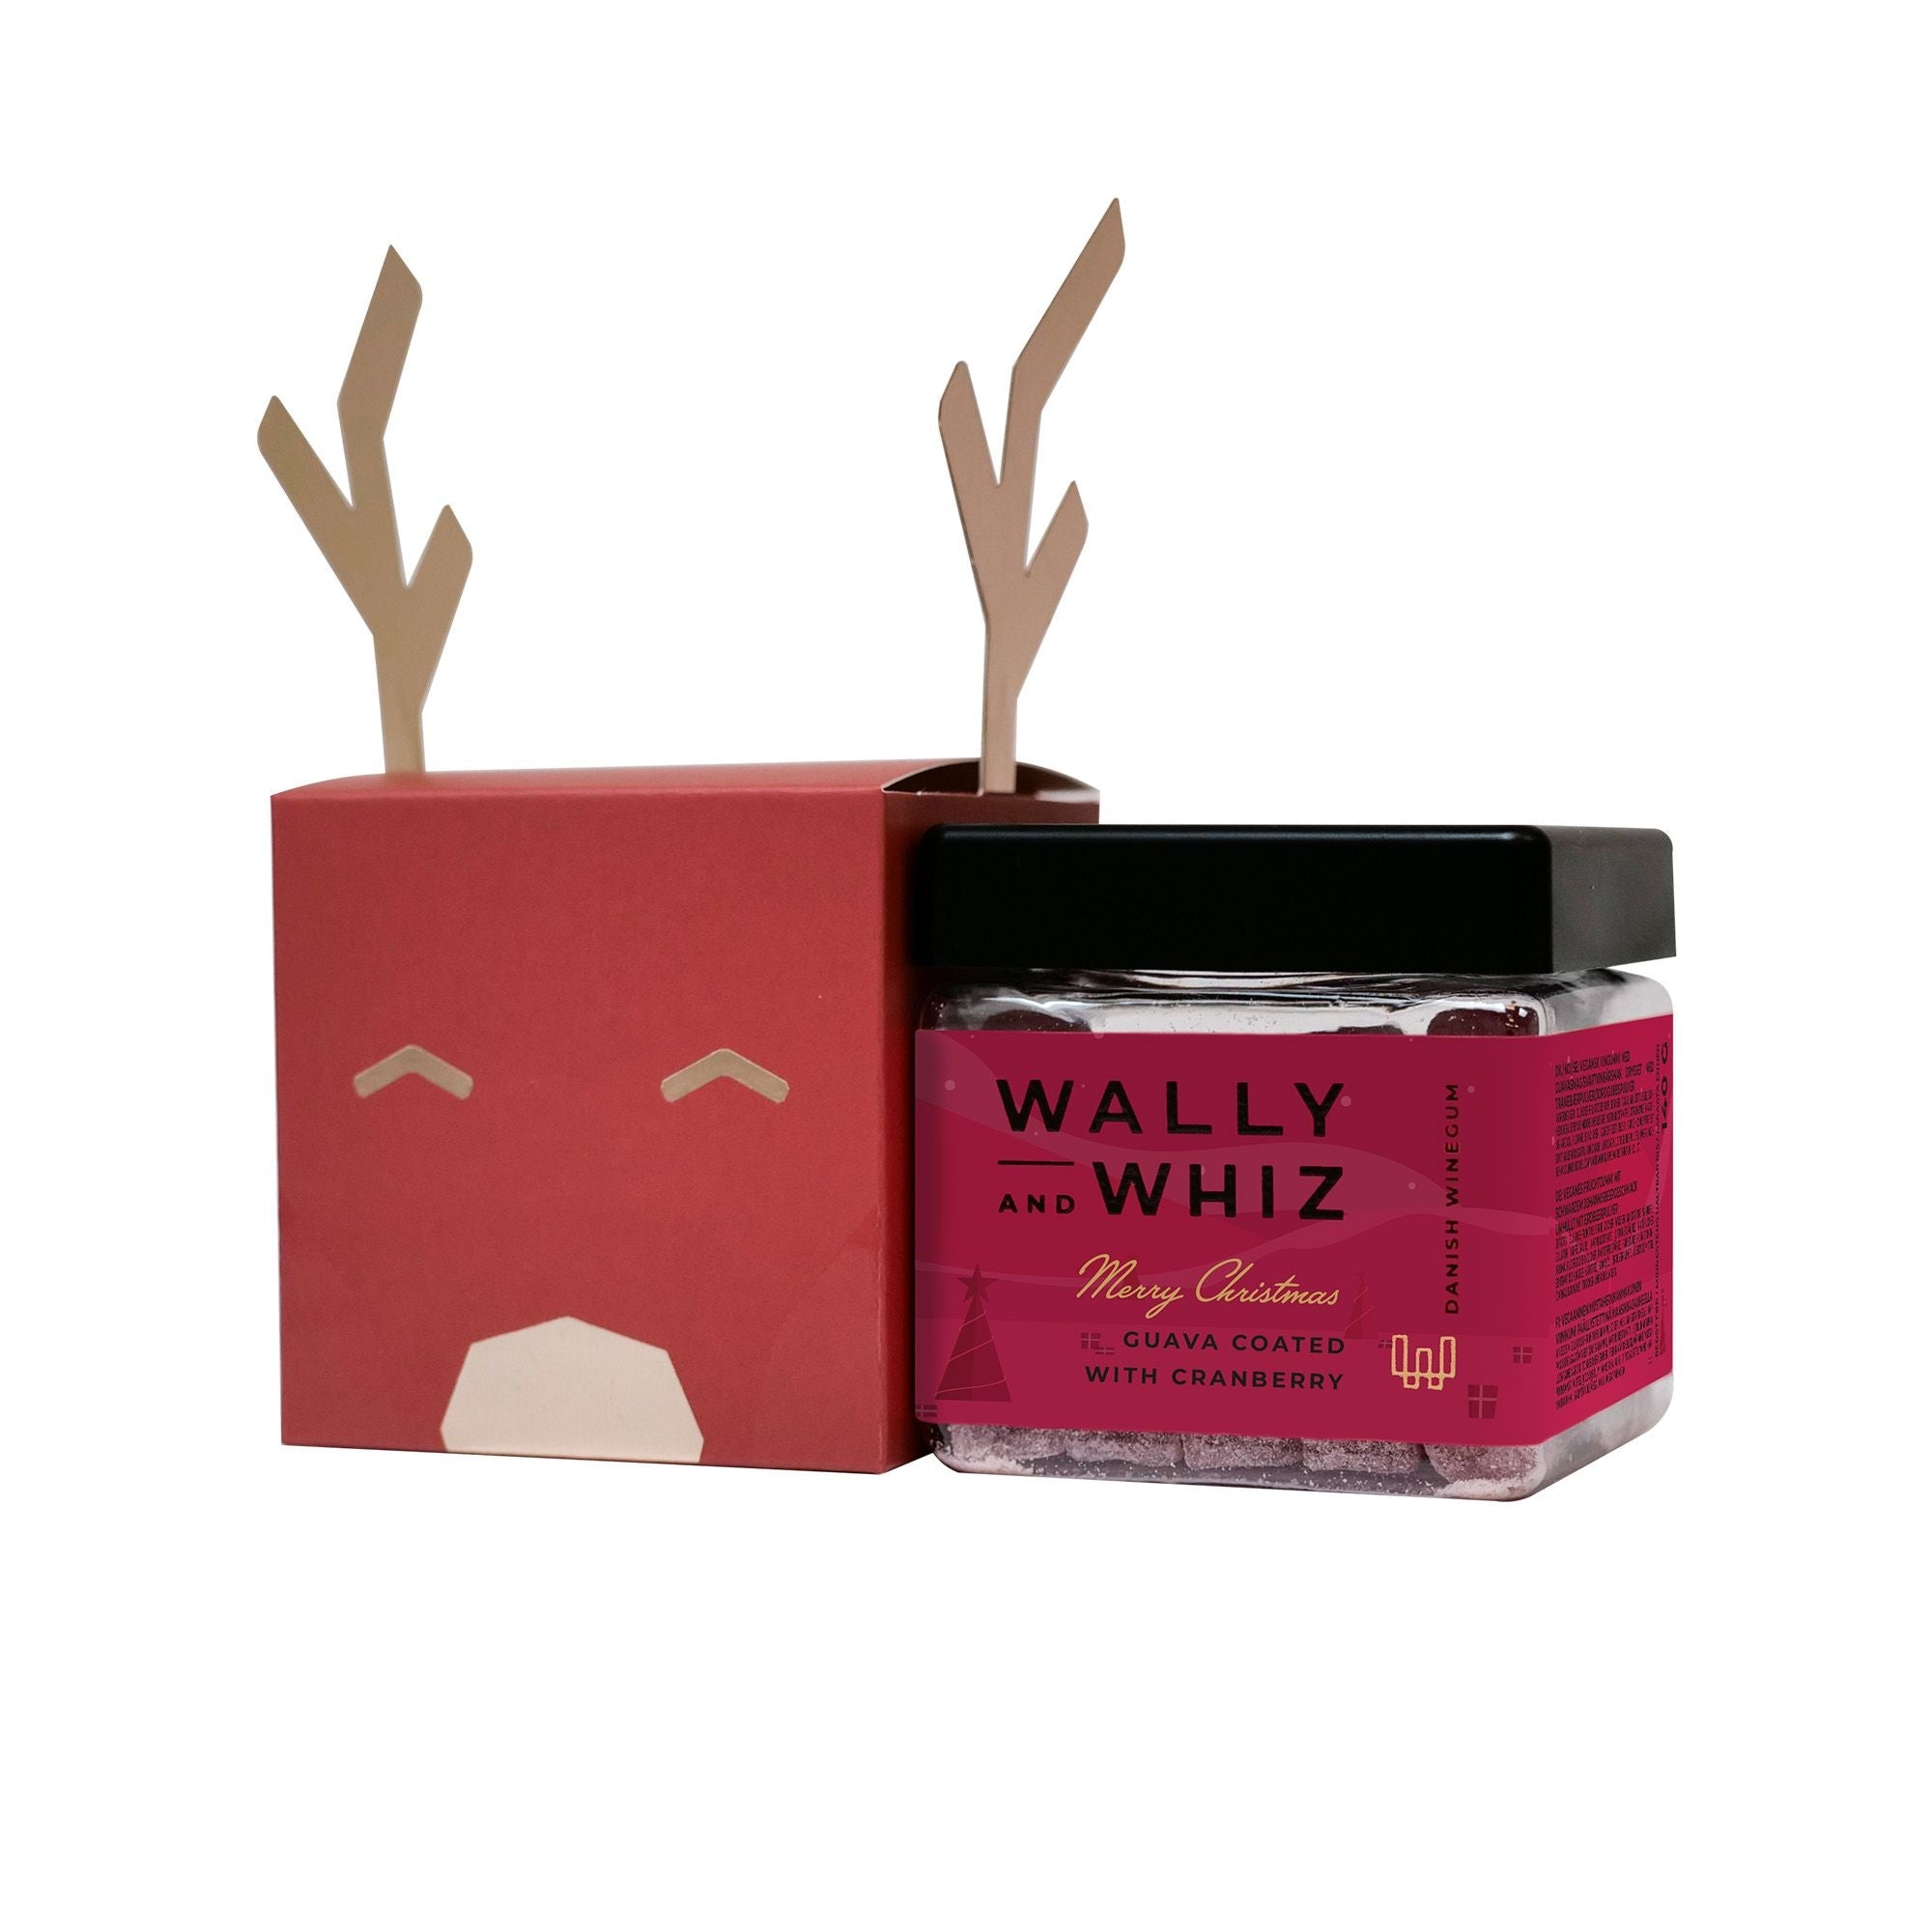 Wally And Whiz Lille Kube, Guava med Cranberry 140g